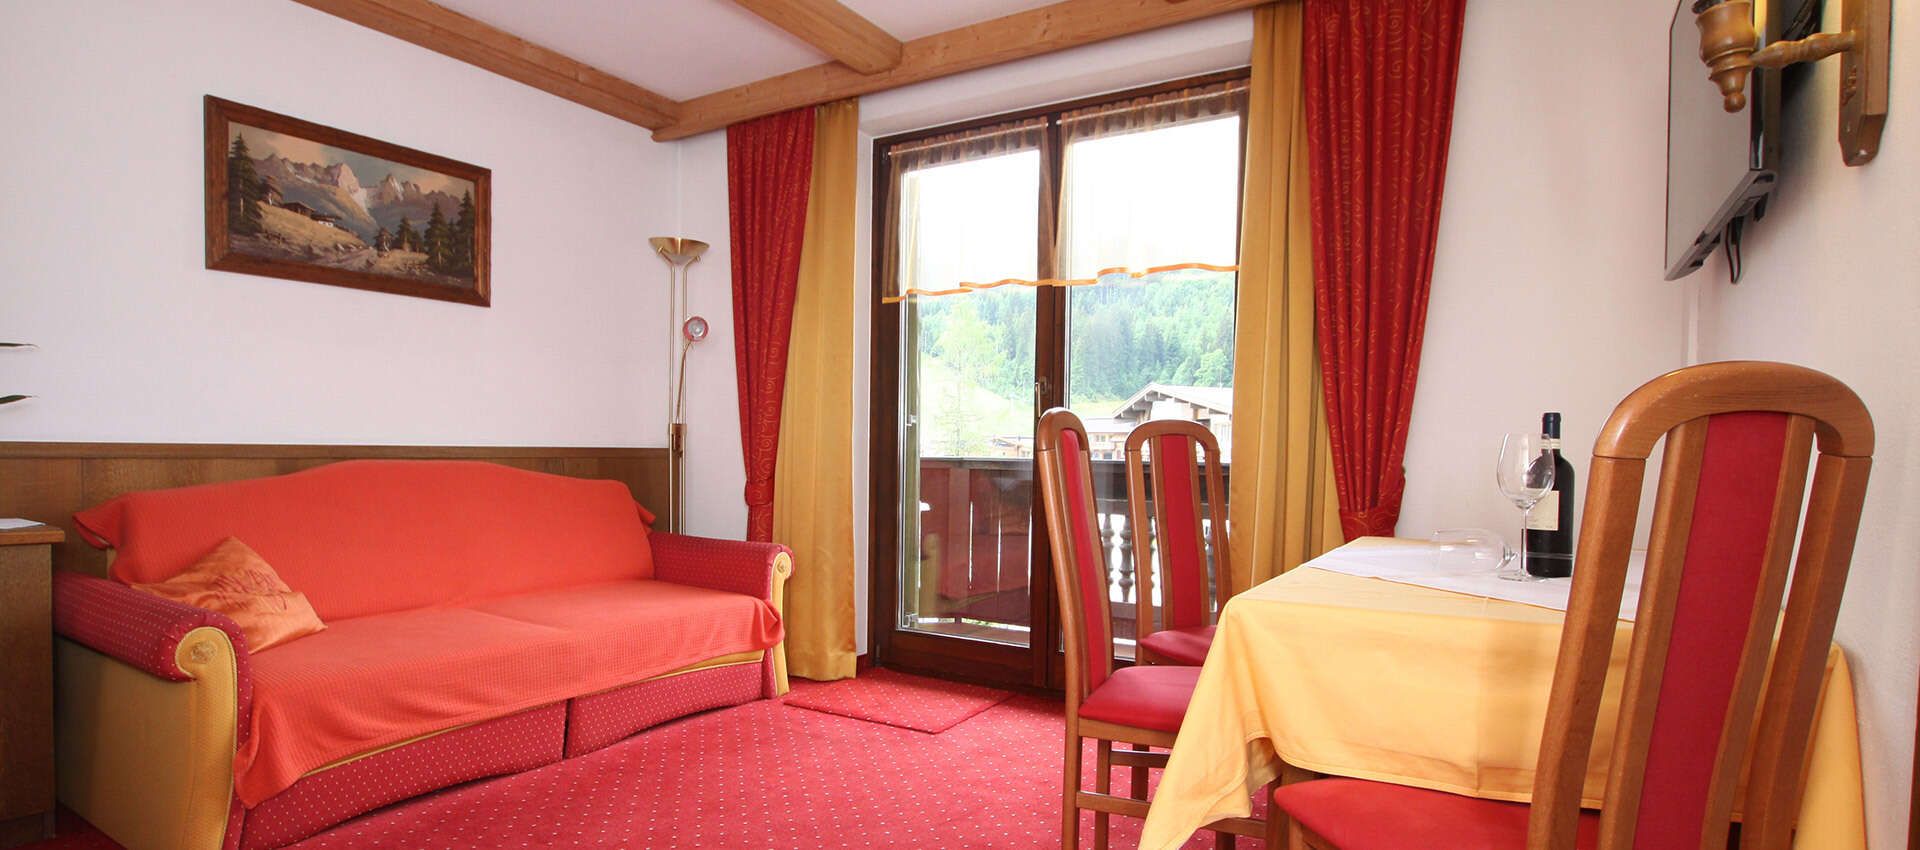 Rooms in the Rössl apartment in Tyrol